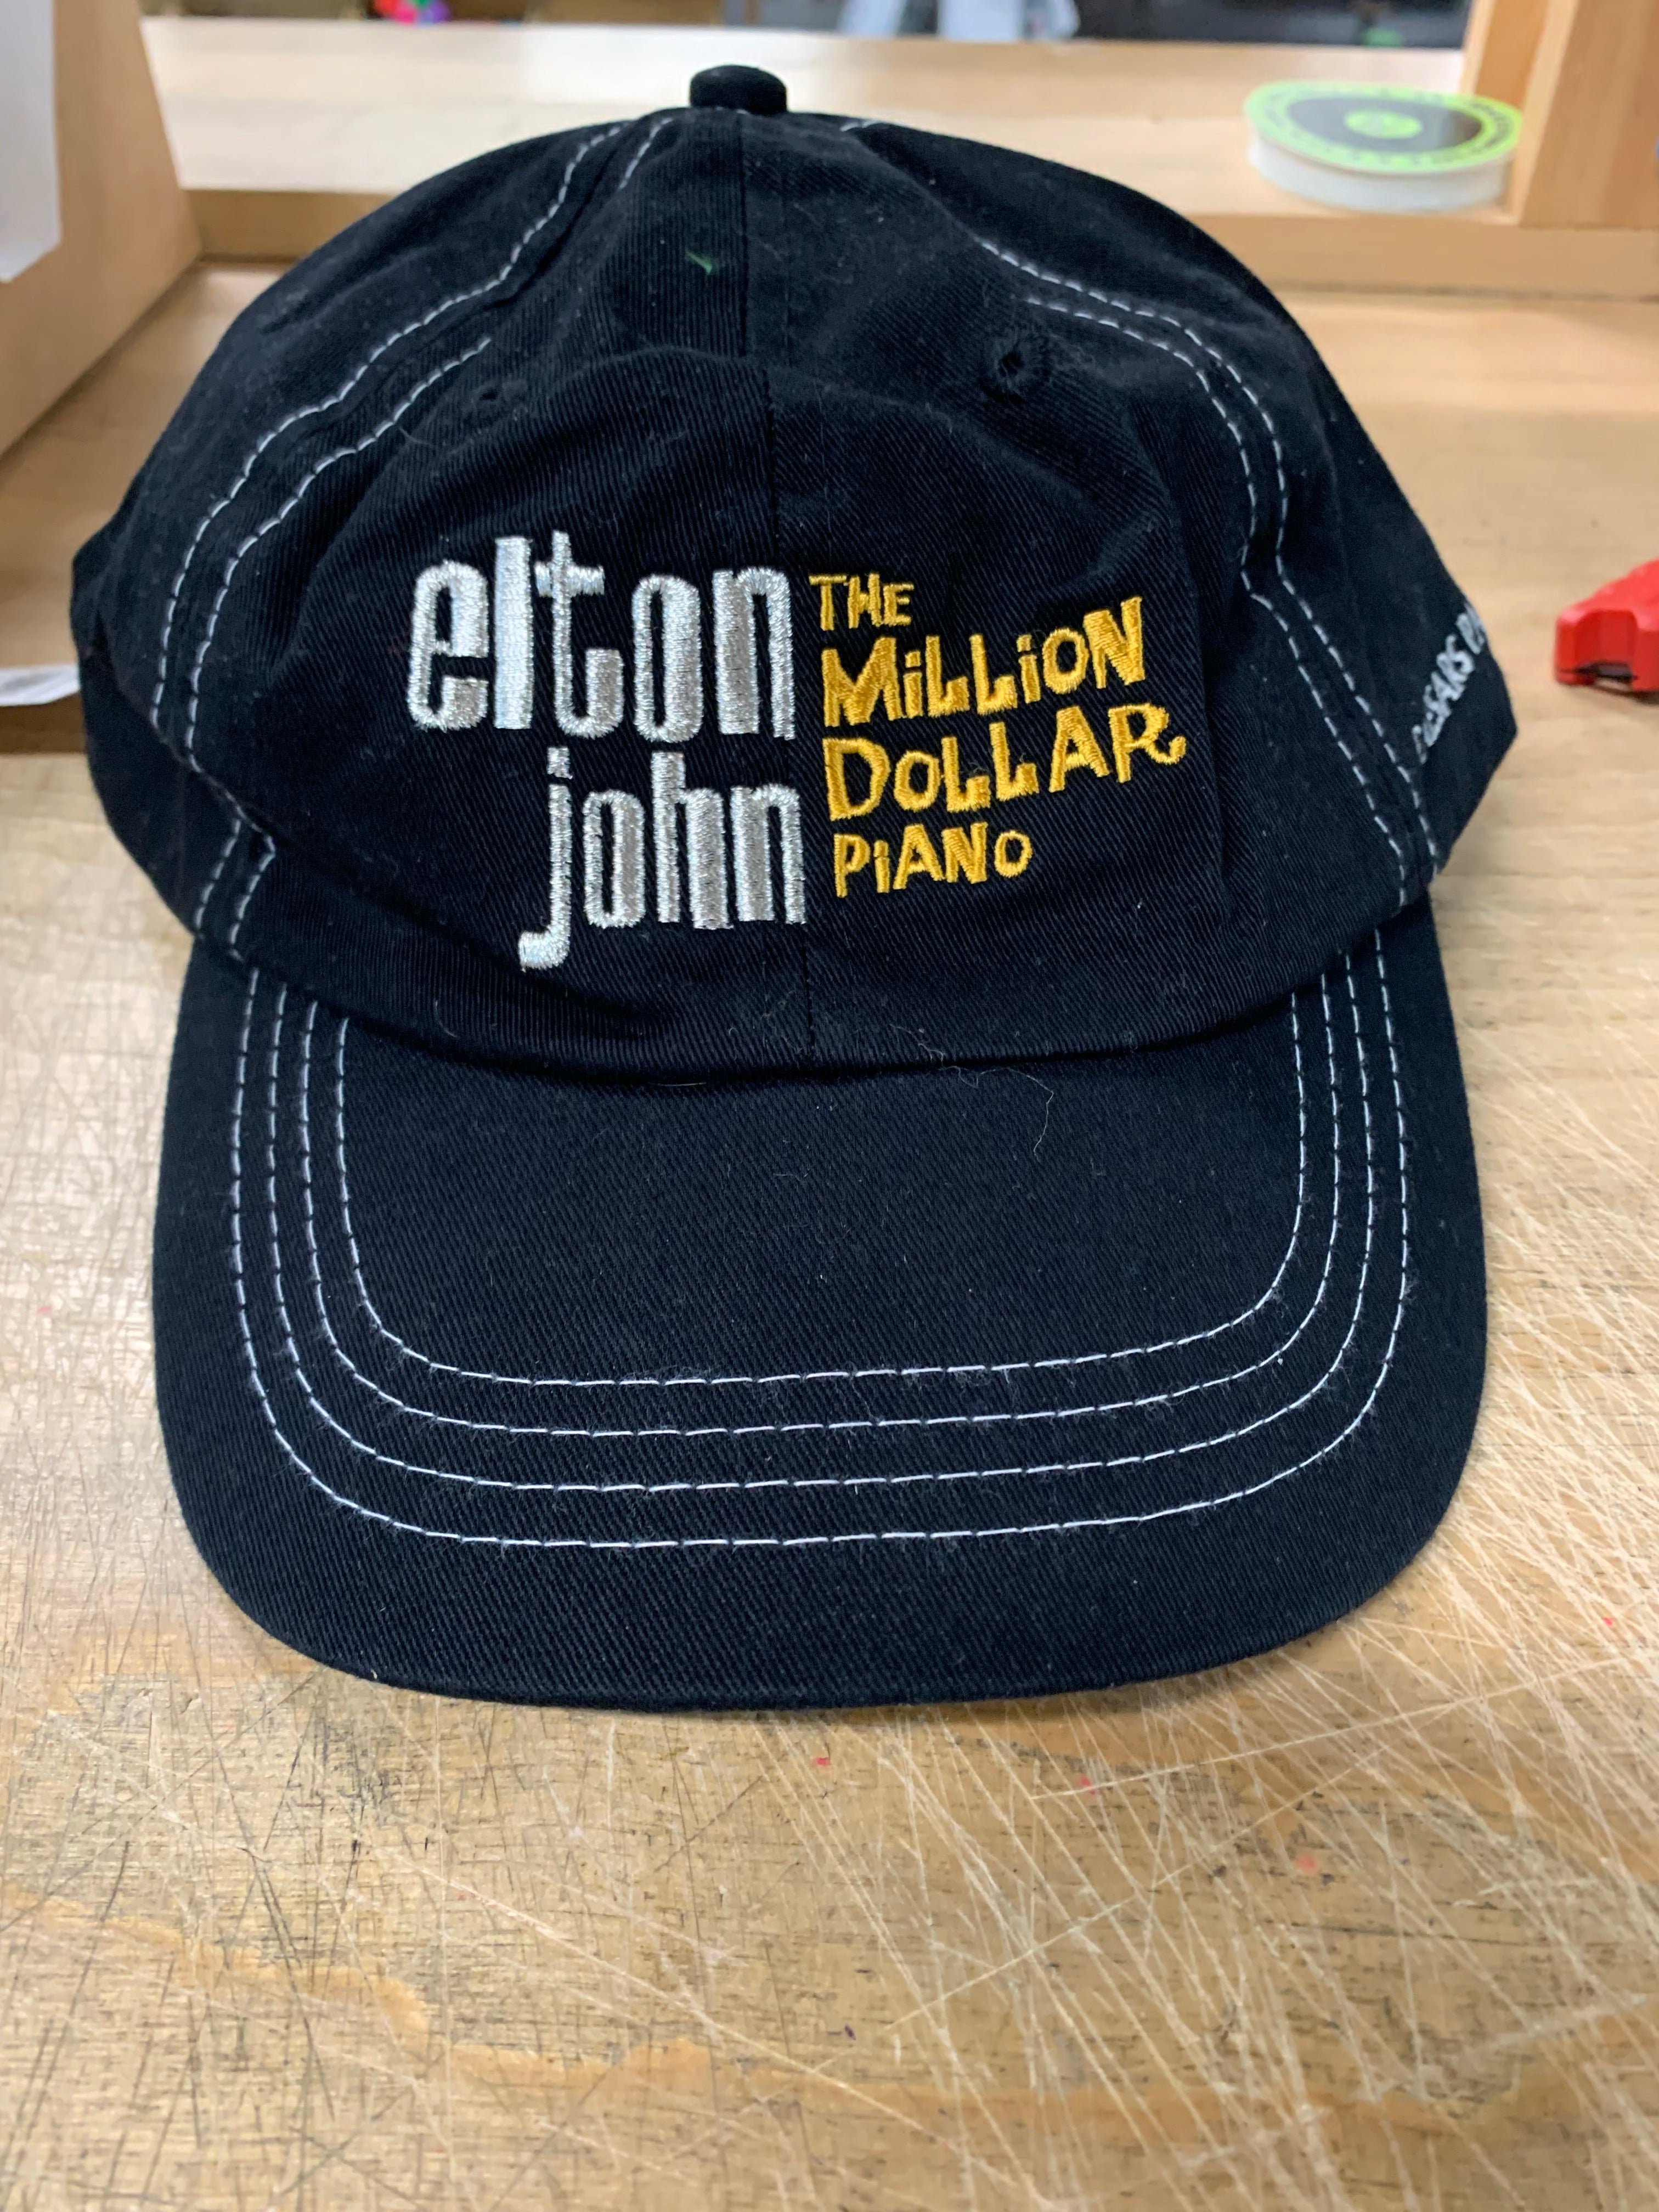 Elton John Million Dollar Piano At Ceasers Palace Baseball Cap, Black, One Size Fits Most